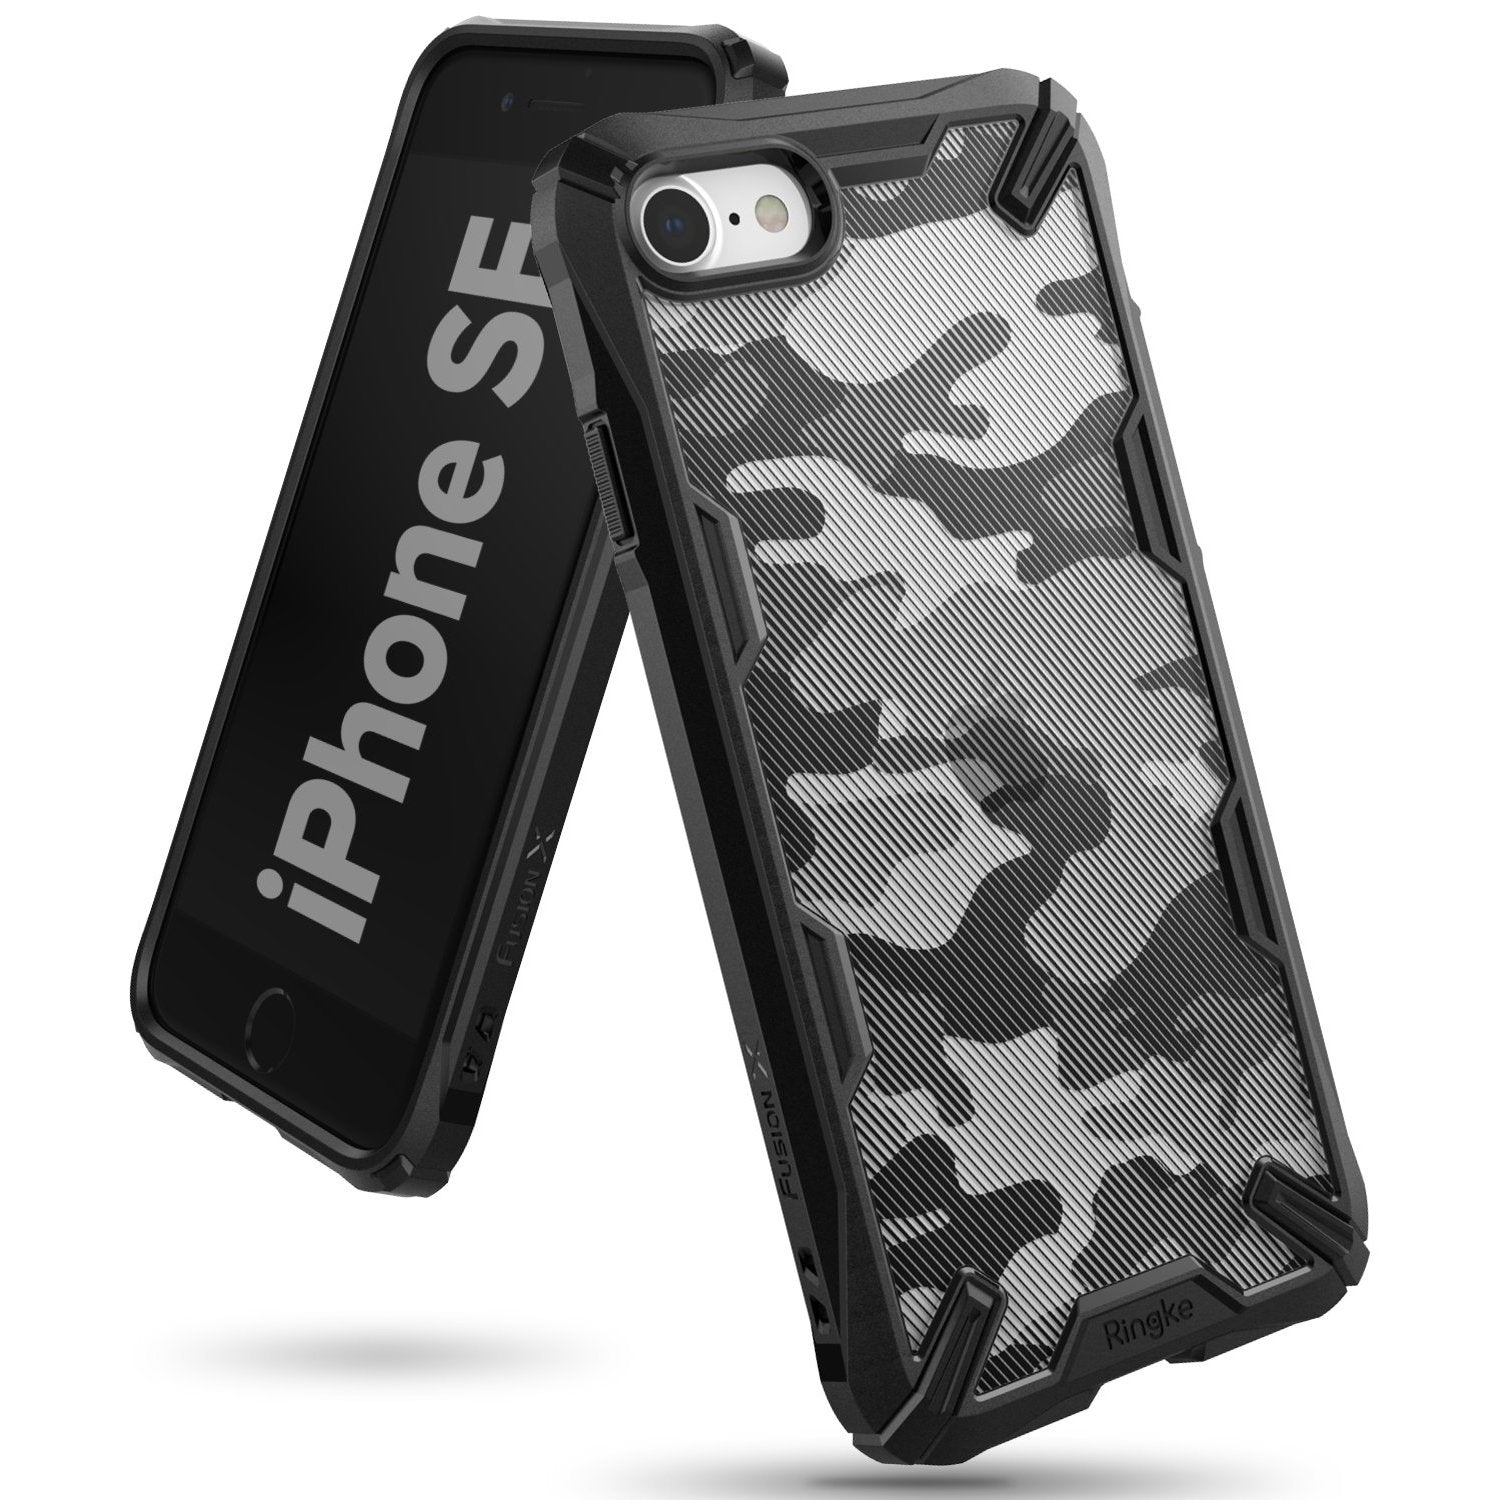 Ringke Fusion X Case for iPhone SE 2nd Generation/iPhone 8/7 4.7", Camo Black Iphone SE Ringke Camo Black 